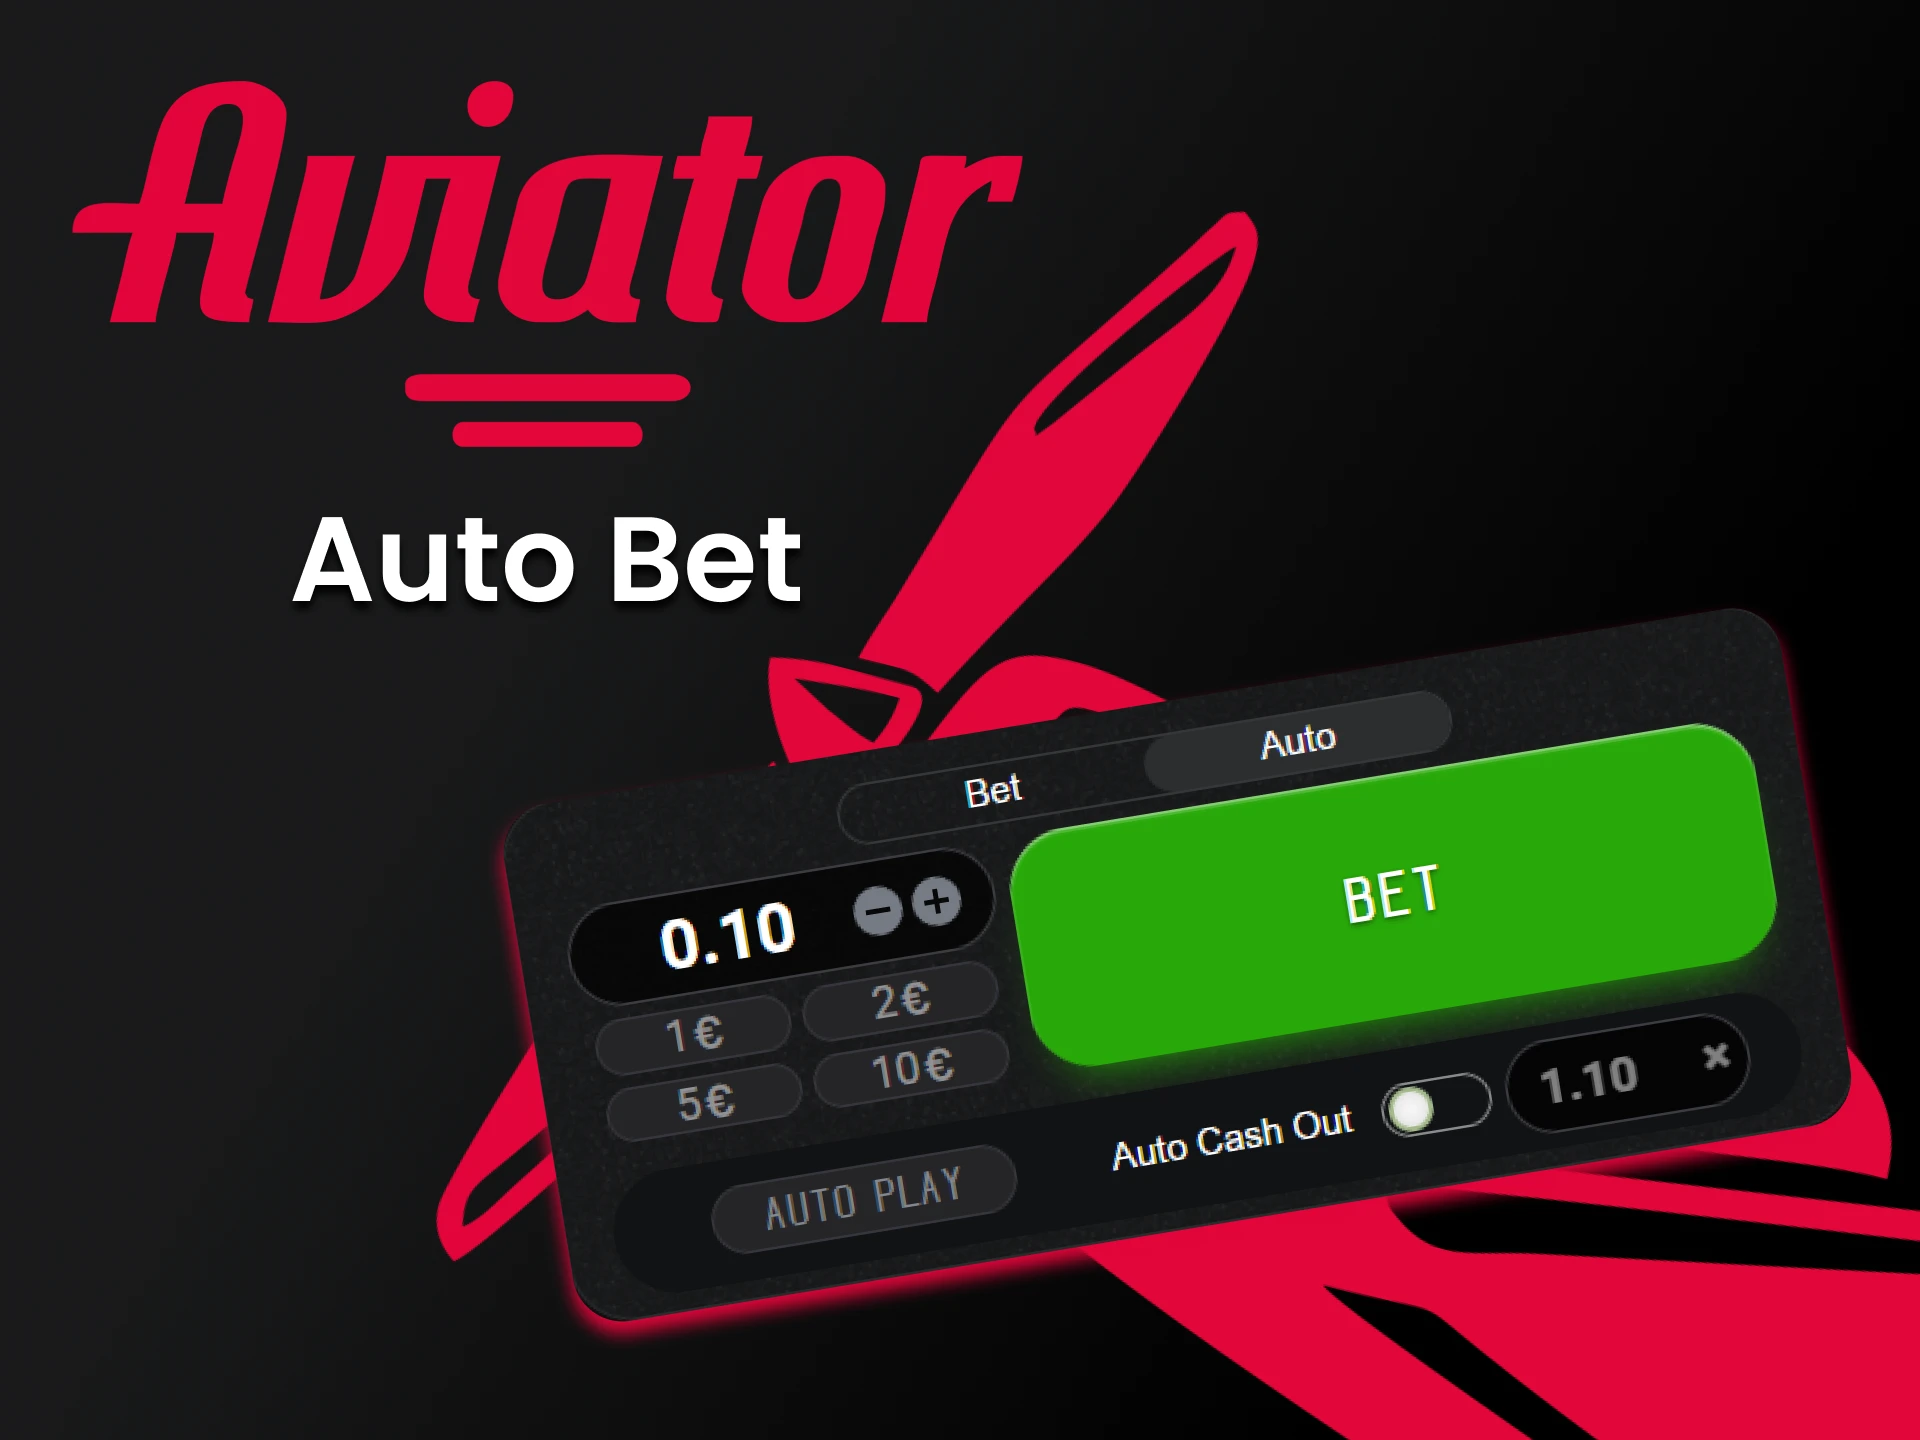 The Aviator game has automatic bets.